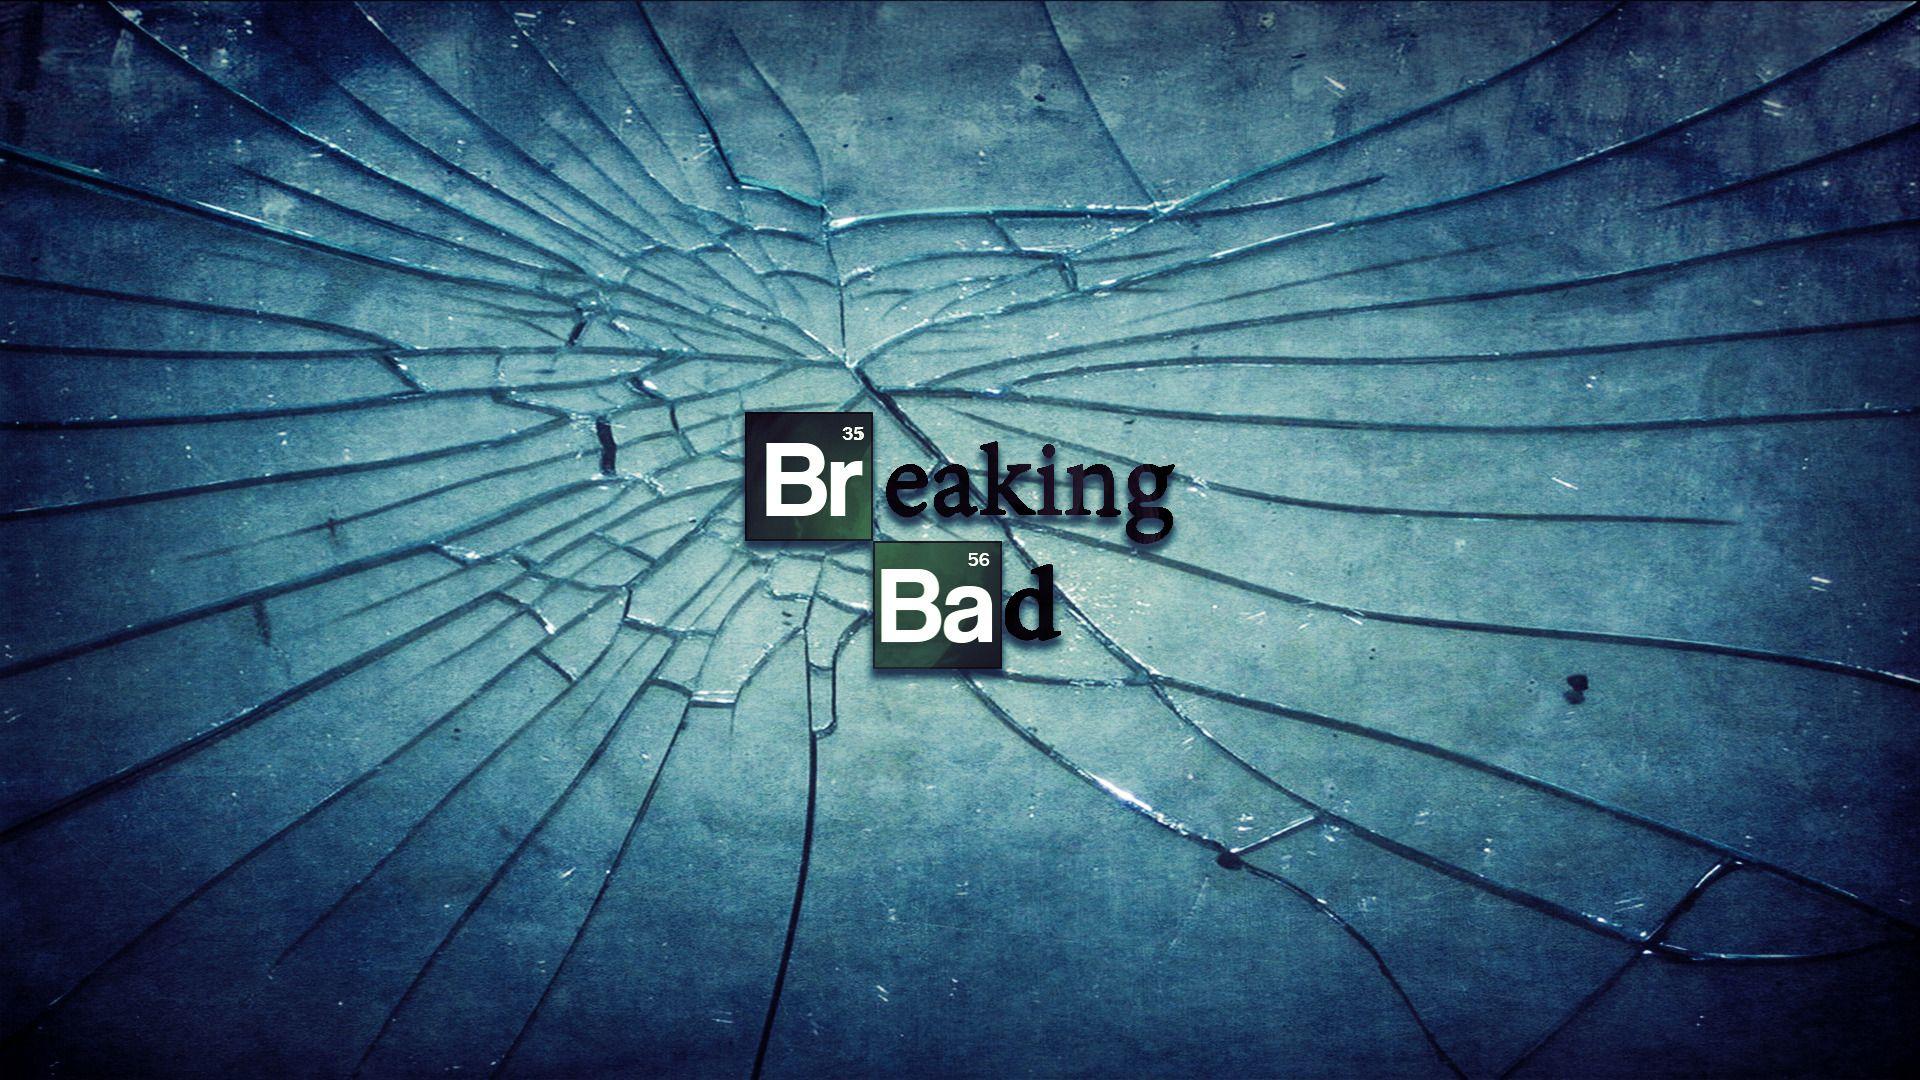 190 Breaking Bad HD Wallpapers and Backgrounds